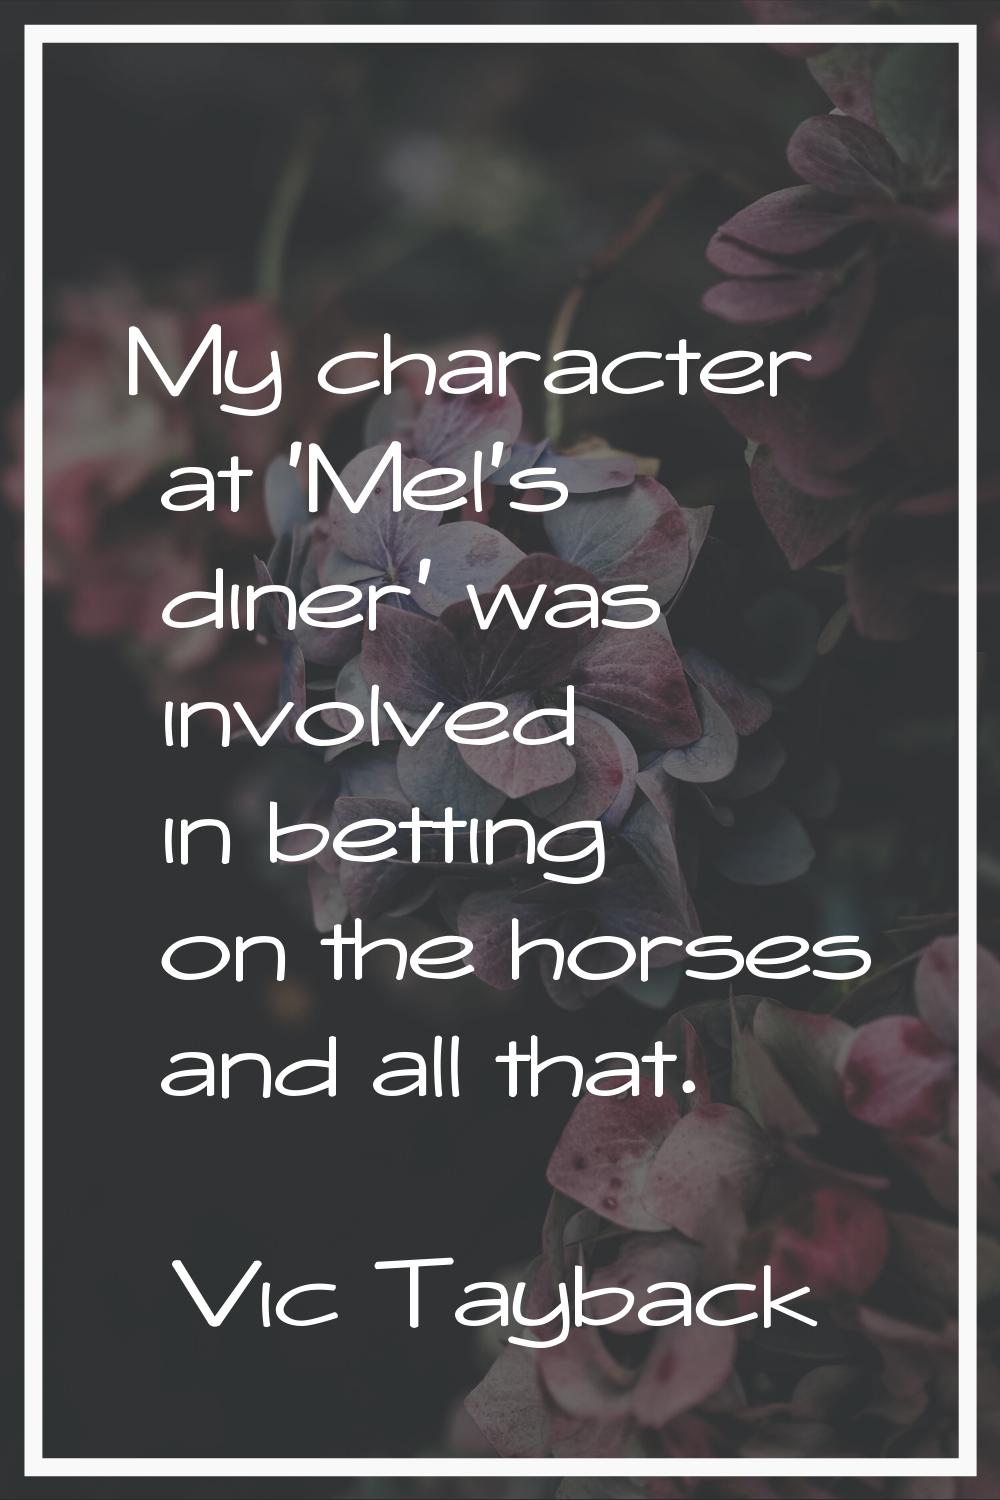 My character at 'Mel's diner' was involved in betting on the horses and all that.